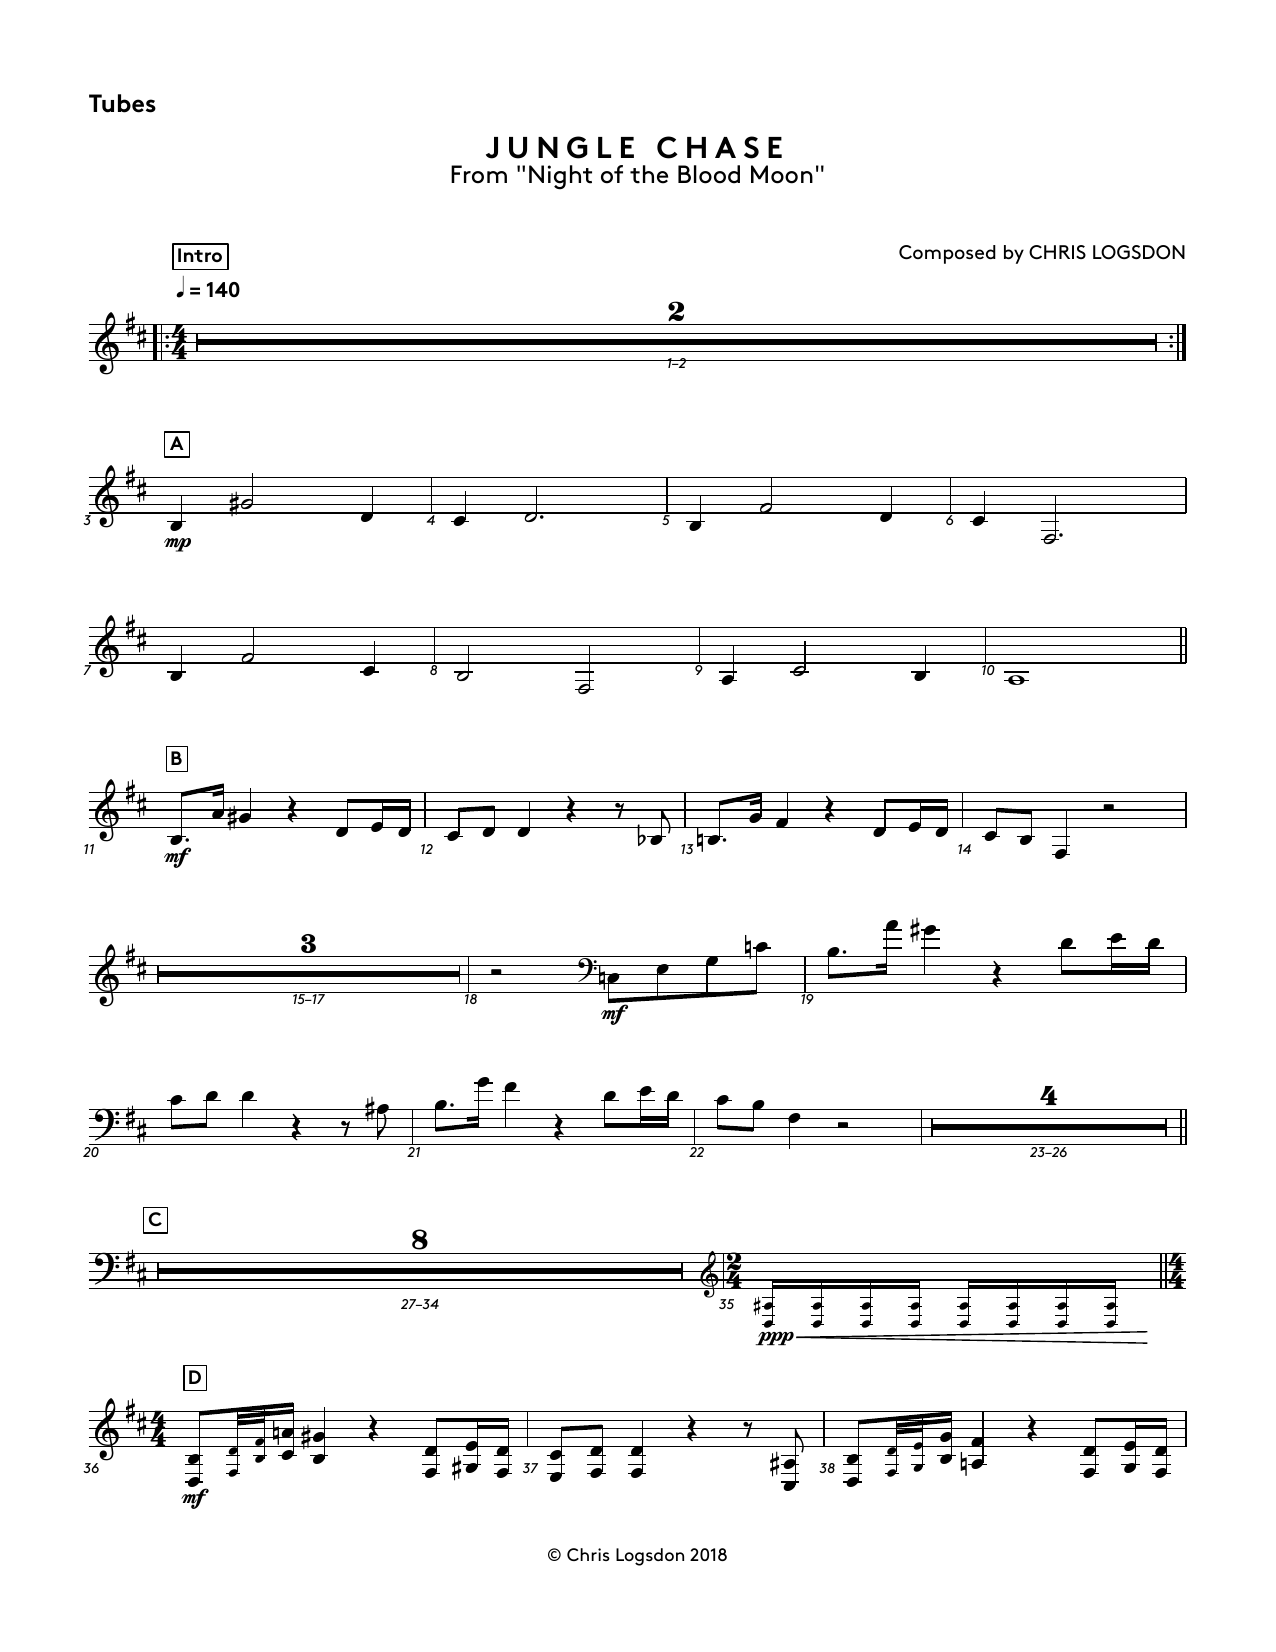 Chris Logsdon Jungle Chase (from Night of the Blood Moon) - Tubes sheet music notes and chords. Download Printable PDF.